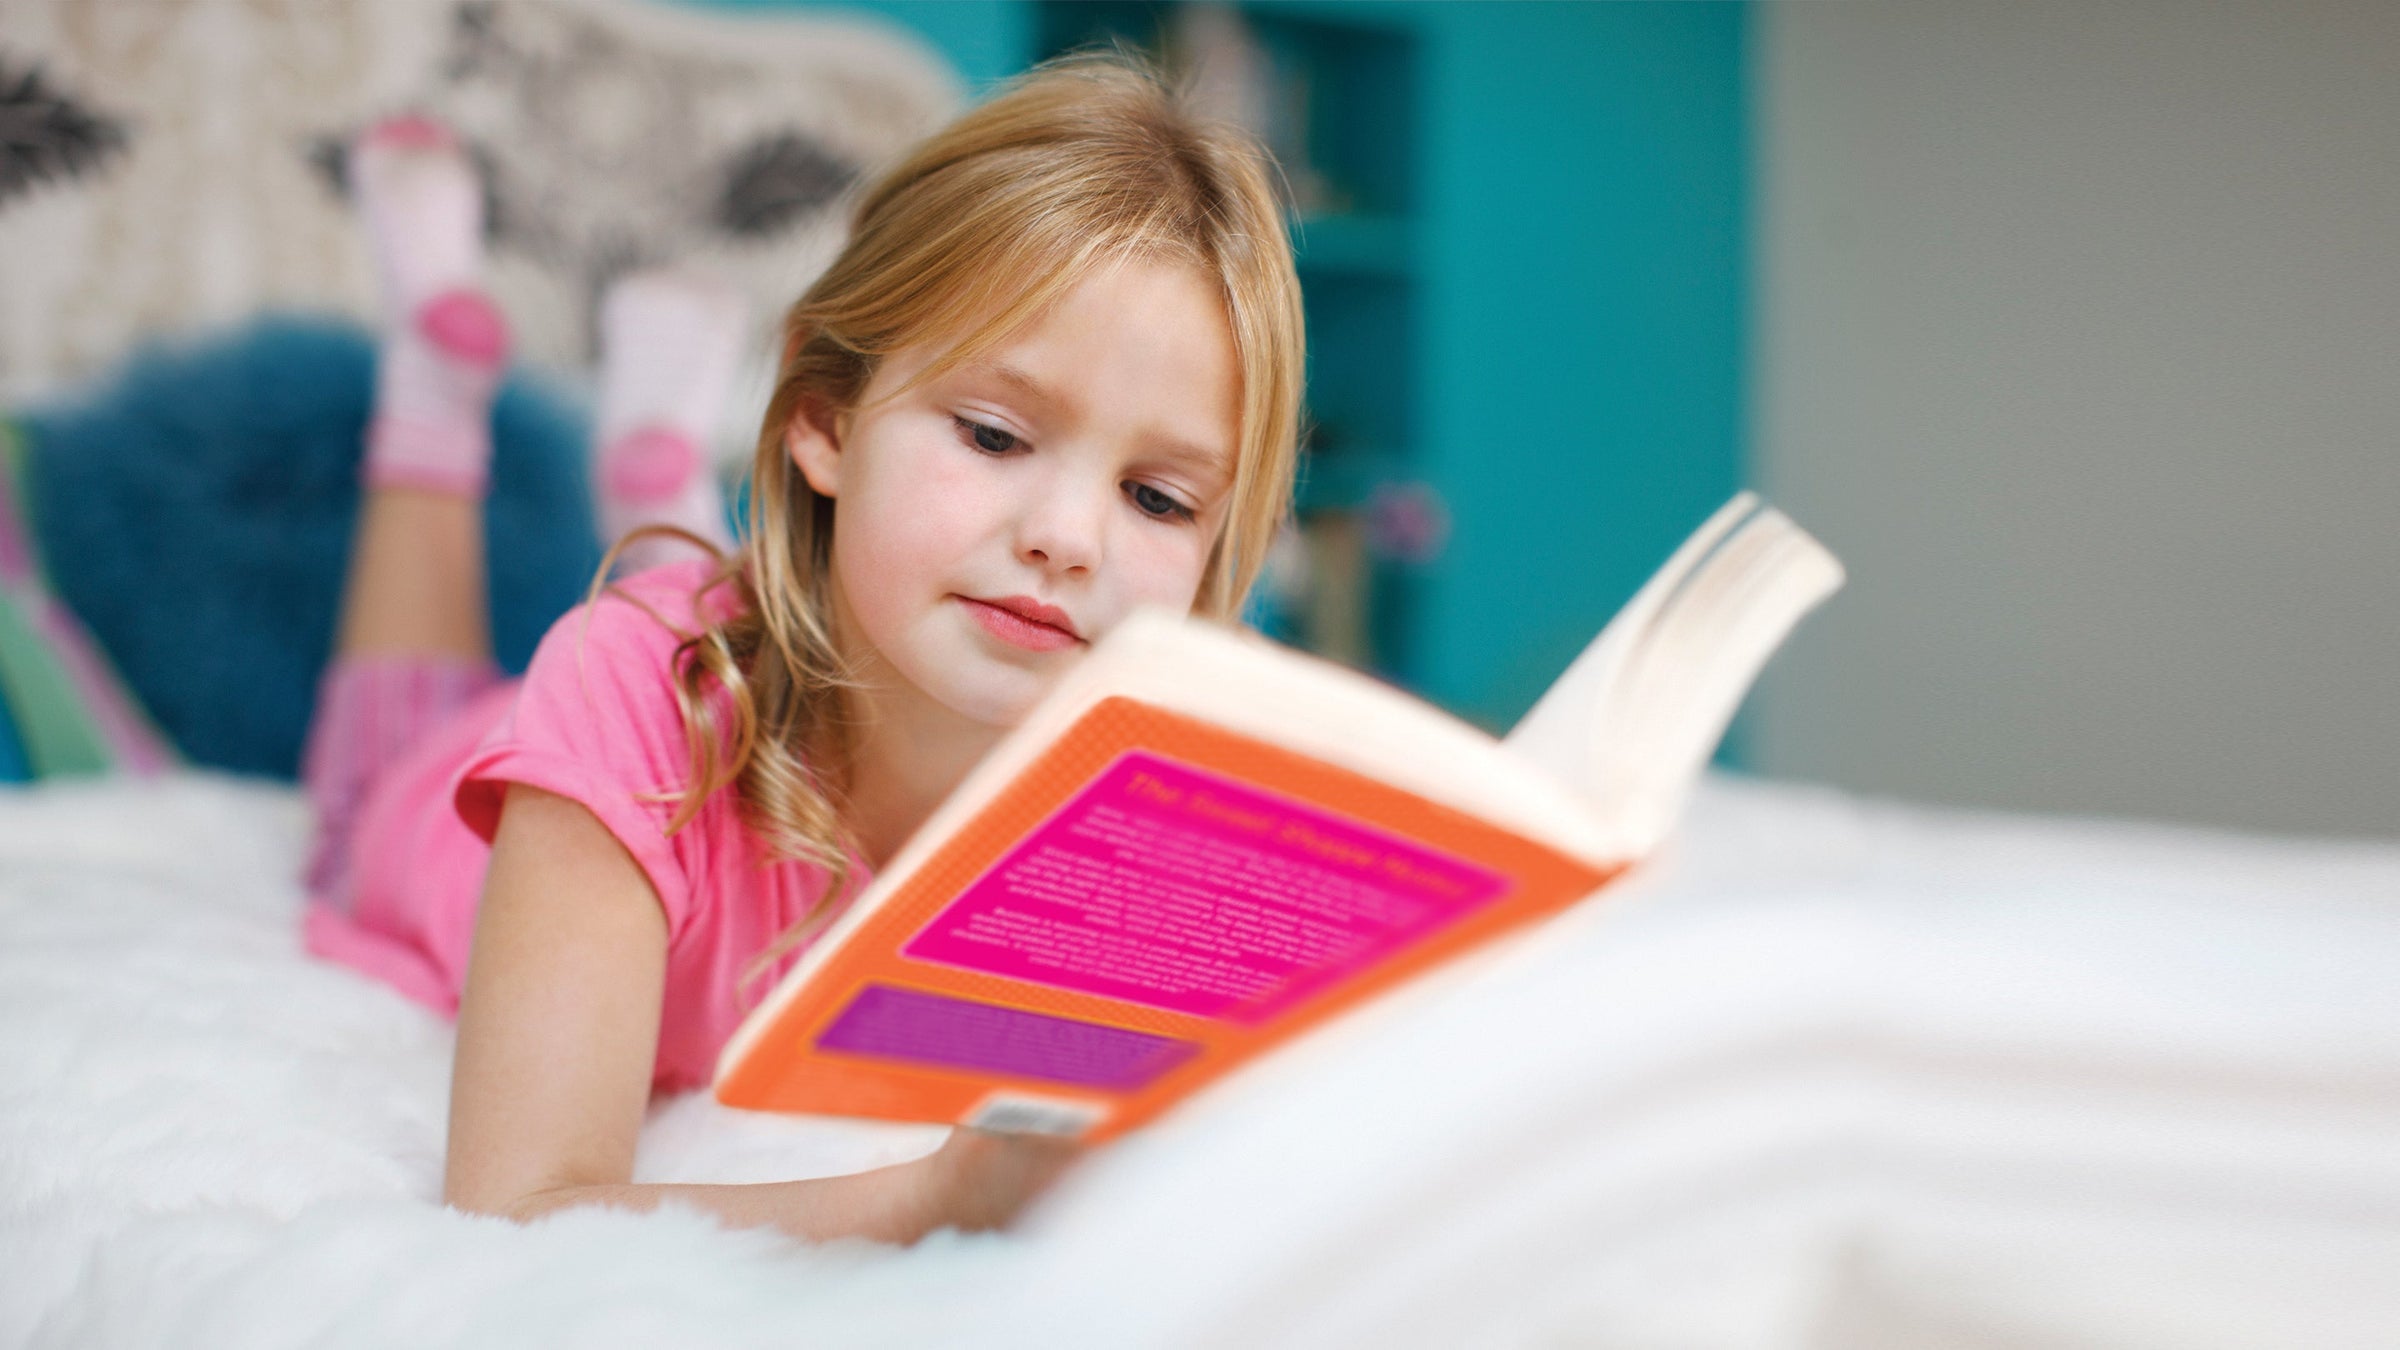 Young Girl reading an Our Generation book in bed